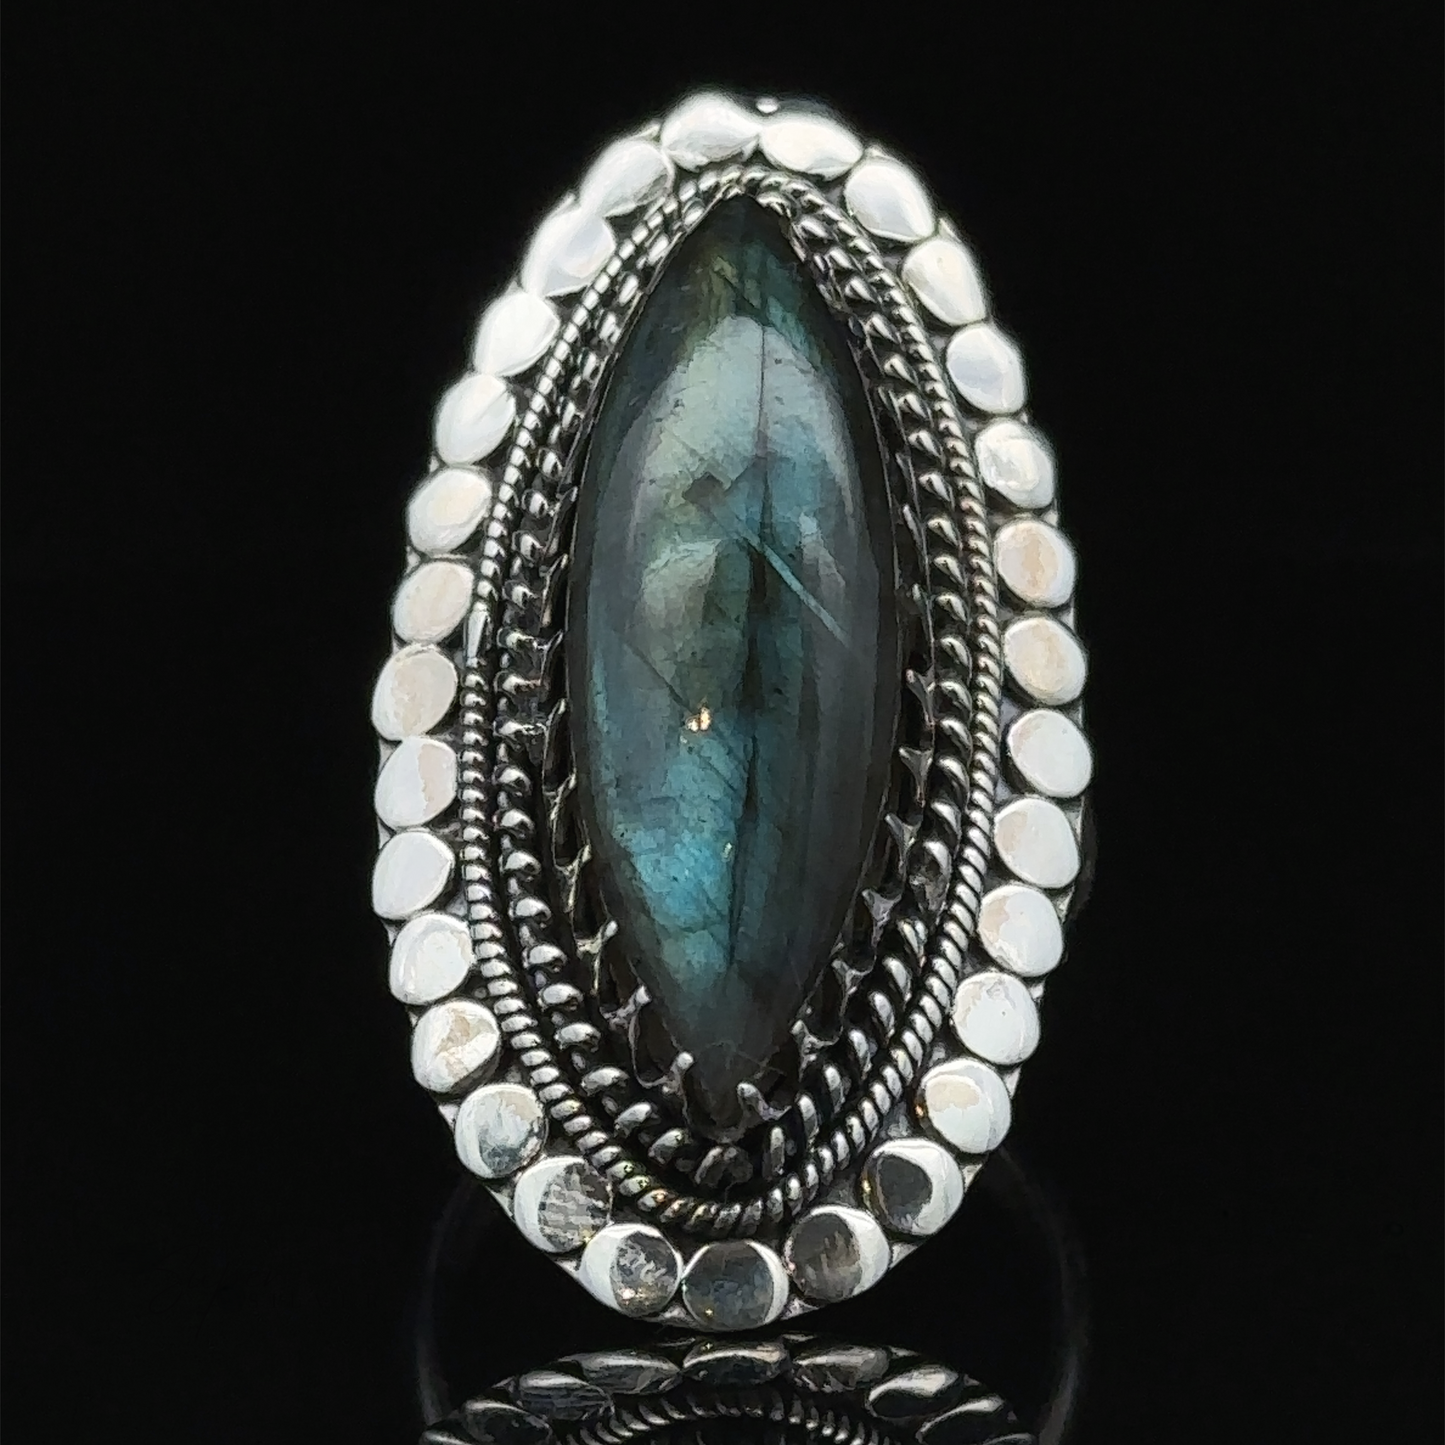 
                  
                    A Statement Marquise Shaped Gemstone Ring with a large, oval-shaped blue-green gemstone, surrounded by intricate detailing and small silver beads, embodies the essence of bohemian jewelry. Set against a black background, this piece is truly eye-catching.
                  
                